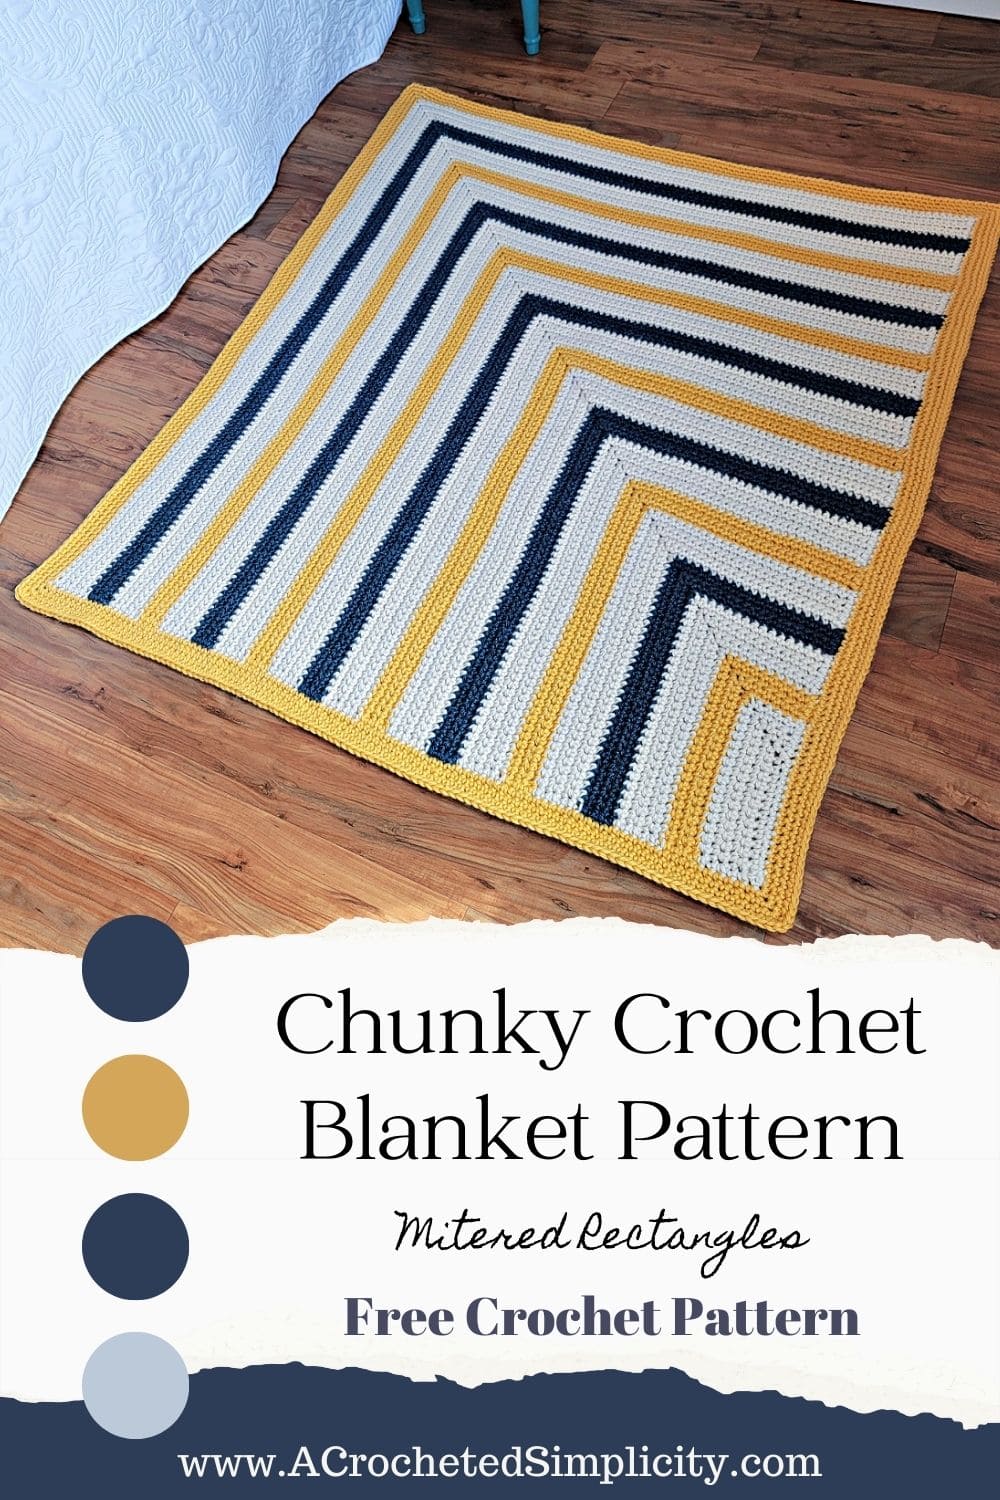 A striped chunky crochet blanket made with super bulky 6 yarn laying on wood floor.